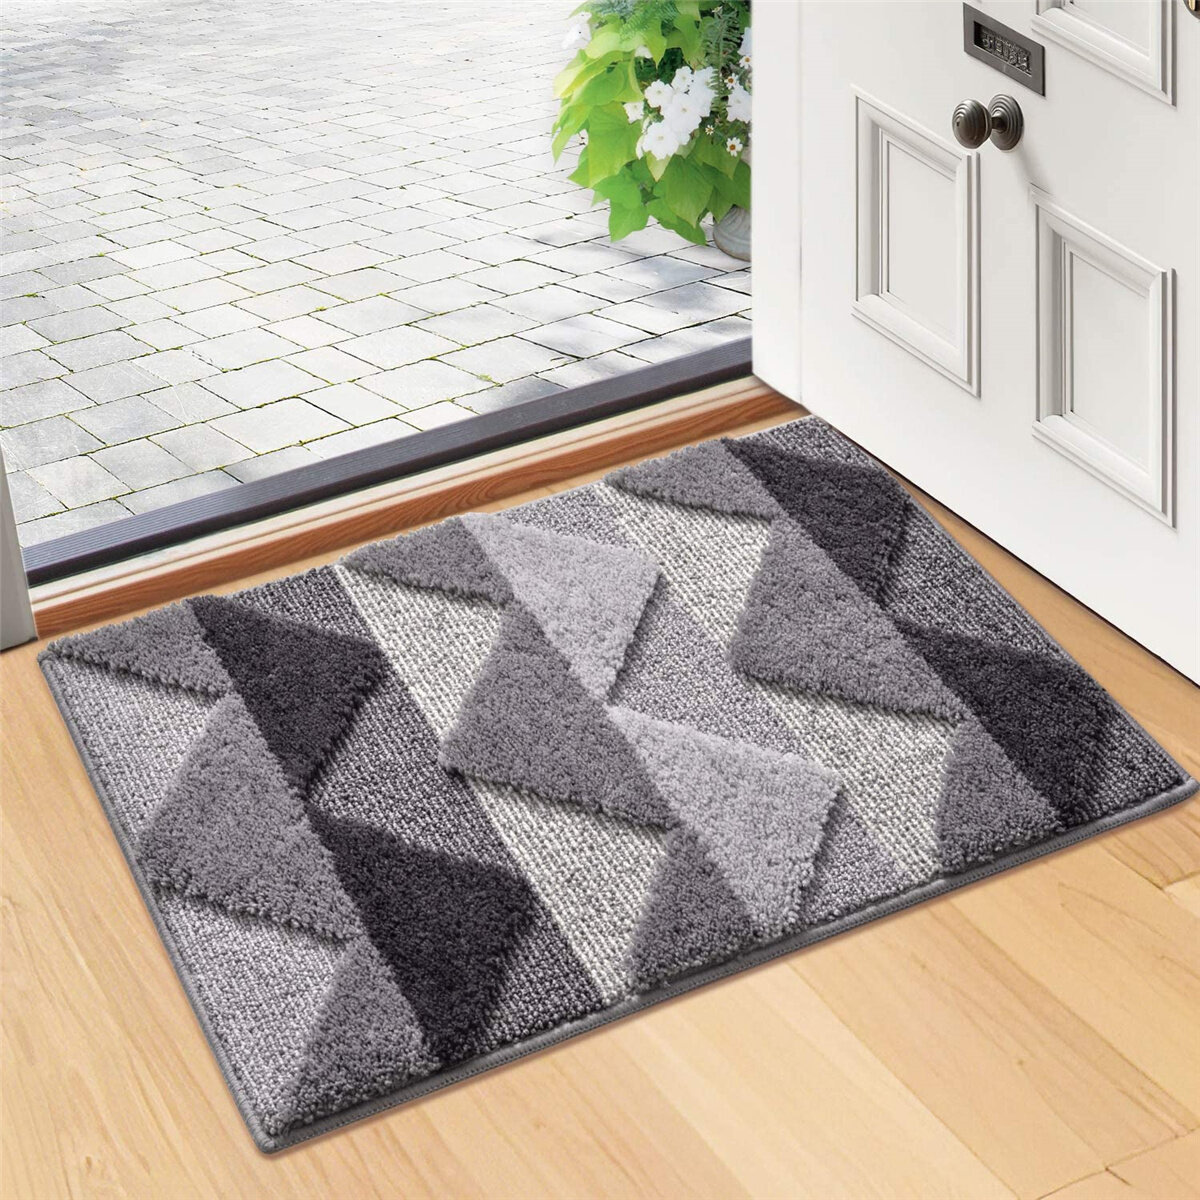 Welcome Mat Entrance Front Door Mats,Home Sweet Home Doormat,Floral Easy Clean Entry Mat,Indoor/Outdoor Washable Non-Slip Kitchen Rug for Outside Porch,Home,Entryway,Bathroom,Farmhouse Decor 24 X 16 